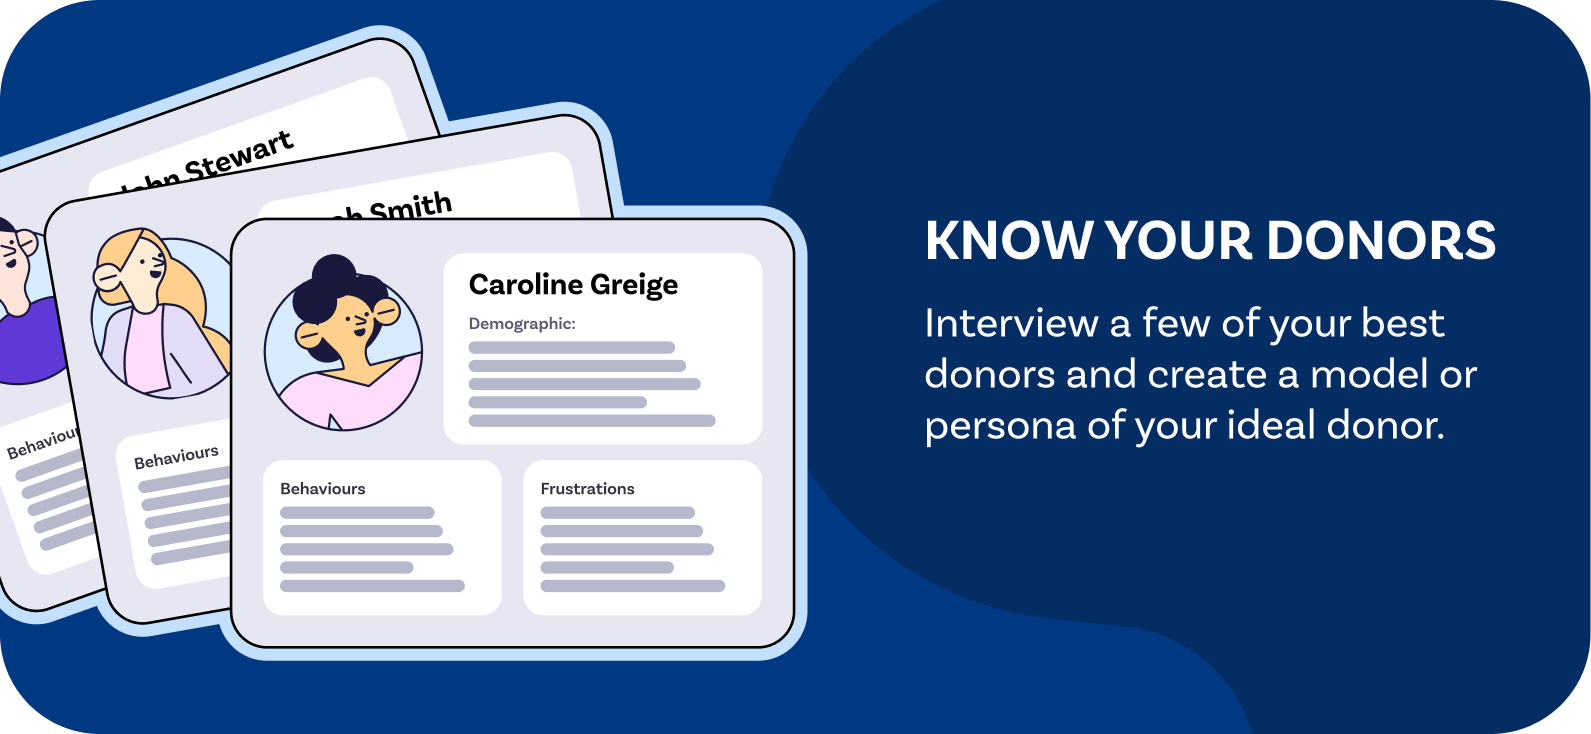 Know your donors - Interview a few of your best donors and review any data you have to create a model or persona of your ideal donor.